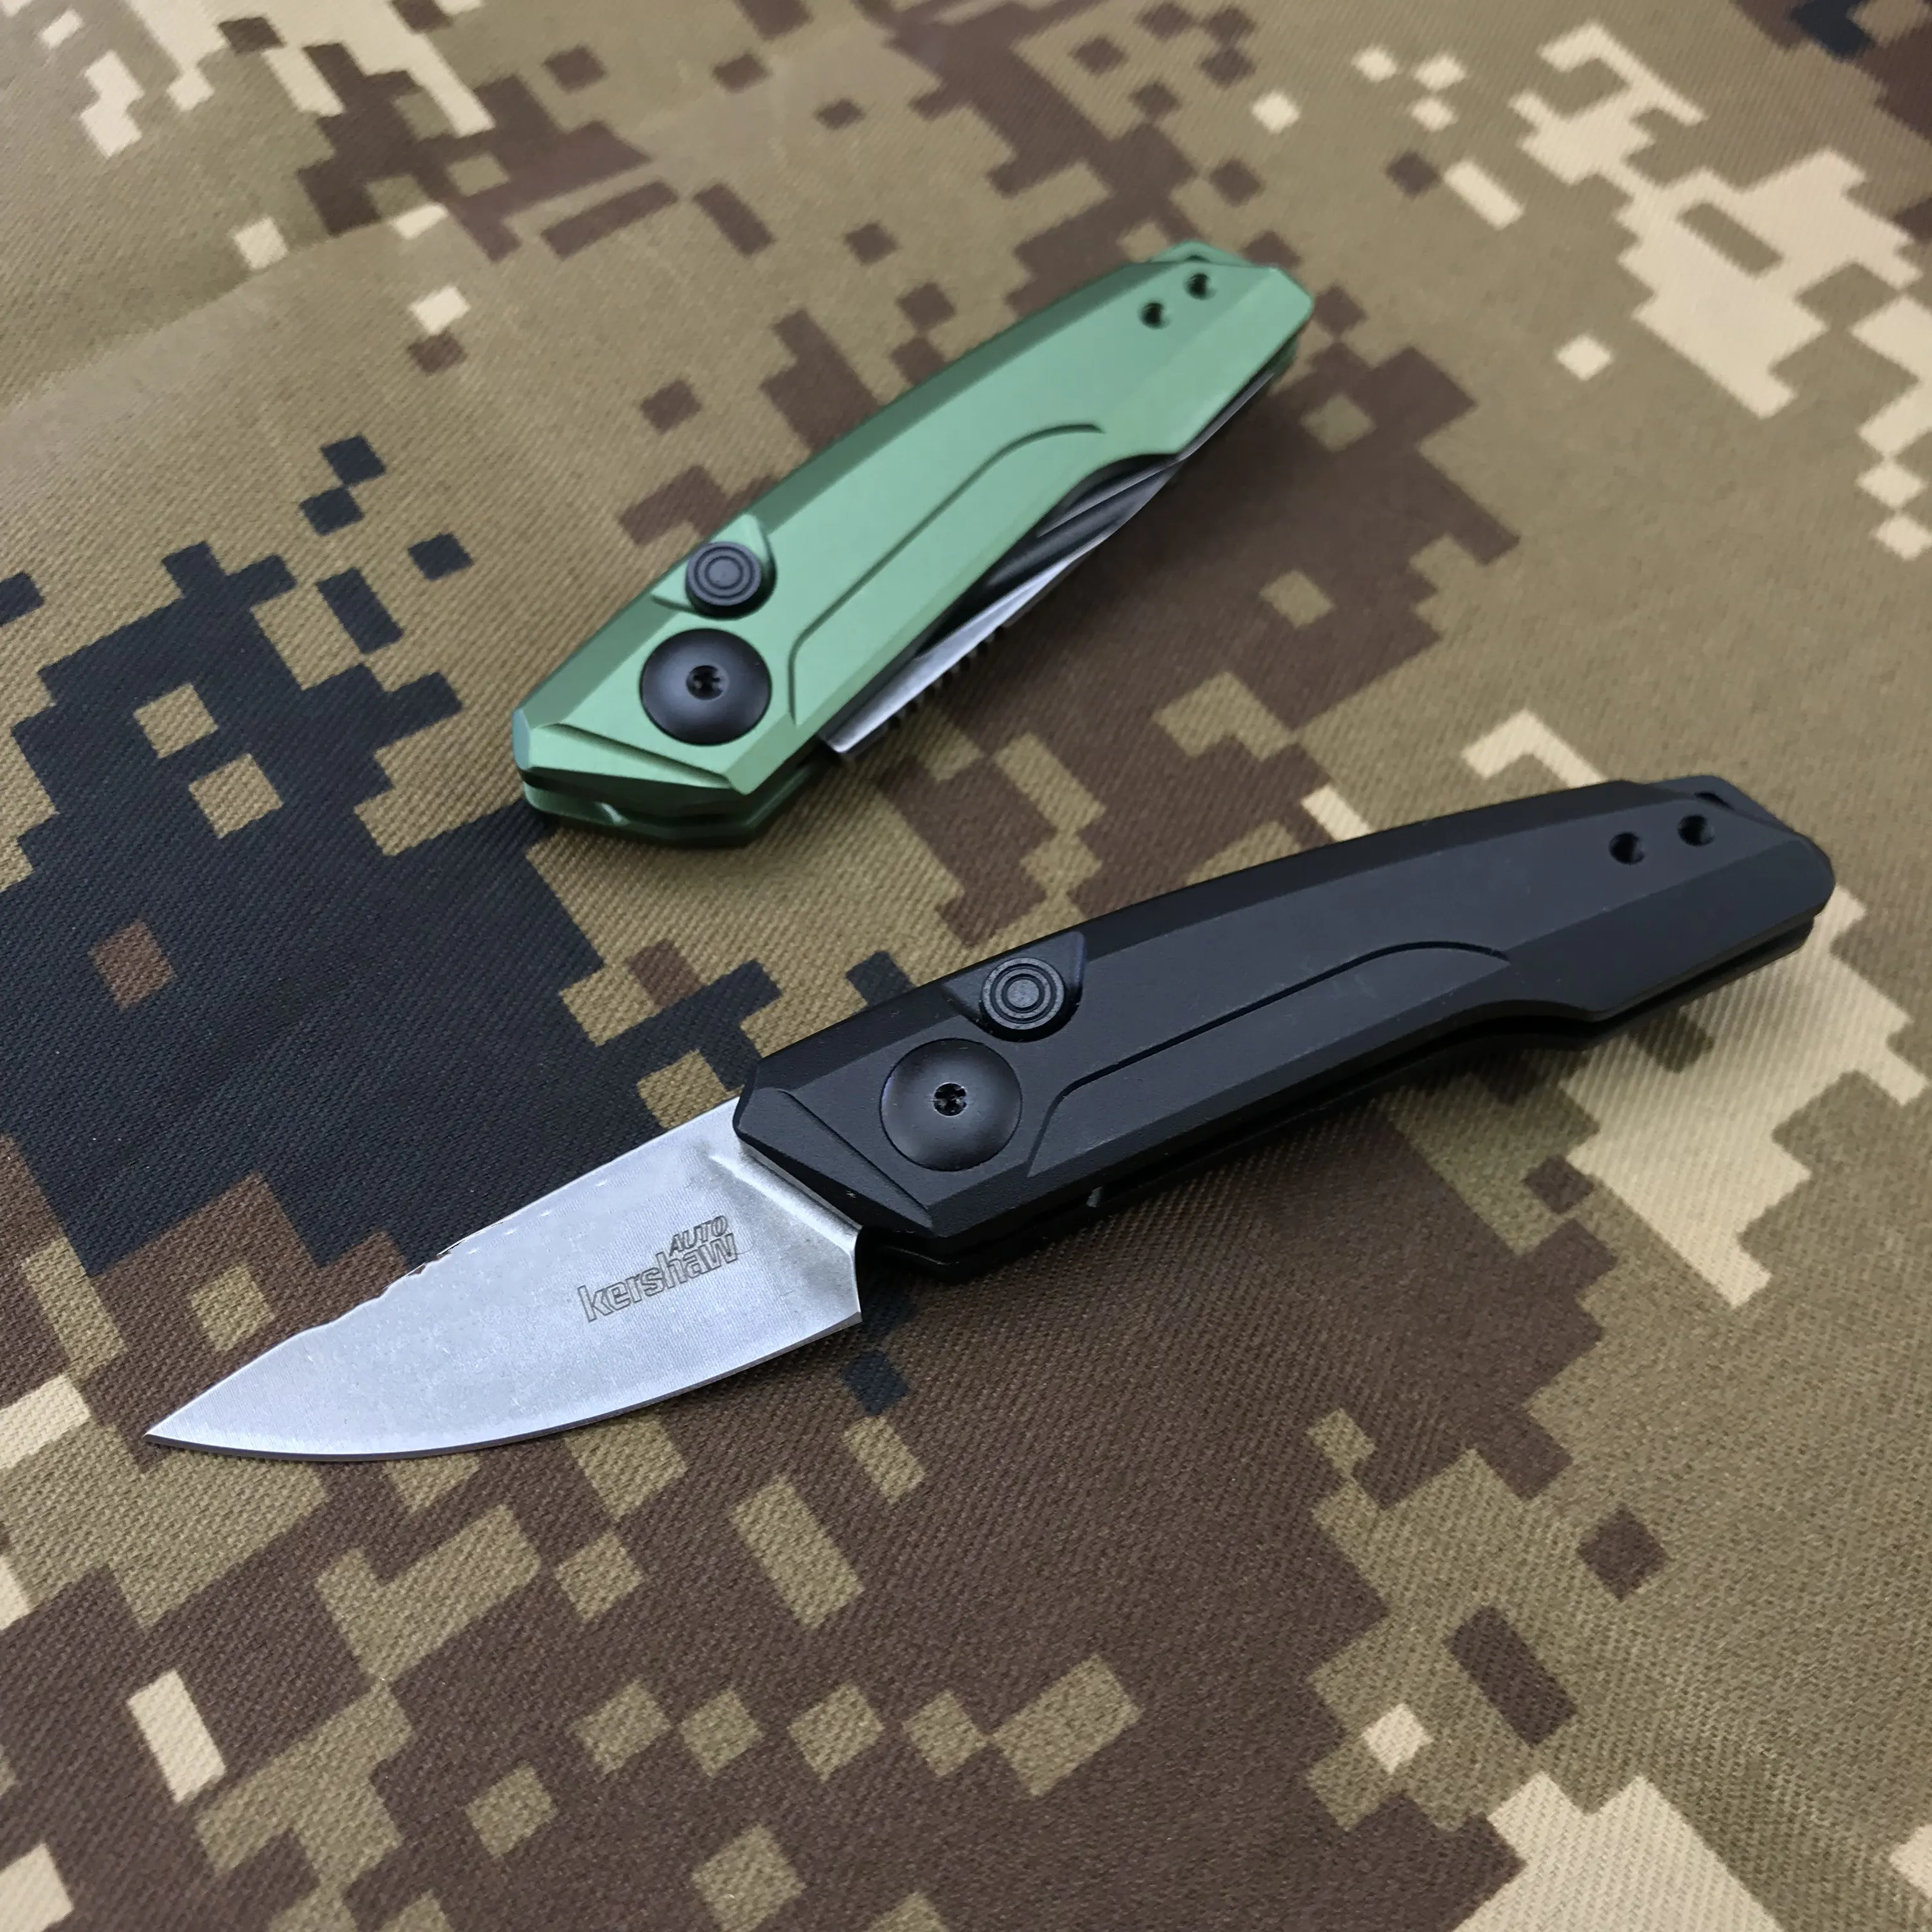 

Kershaw 7250 Launch 9 AUTO Folding Knife Working Finish CPM-154 Drop Point Blade Anodized Aluminum Handle Outdoor Hunting Knives